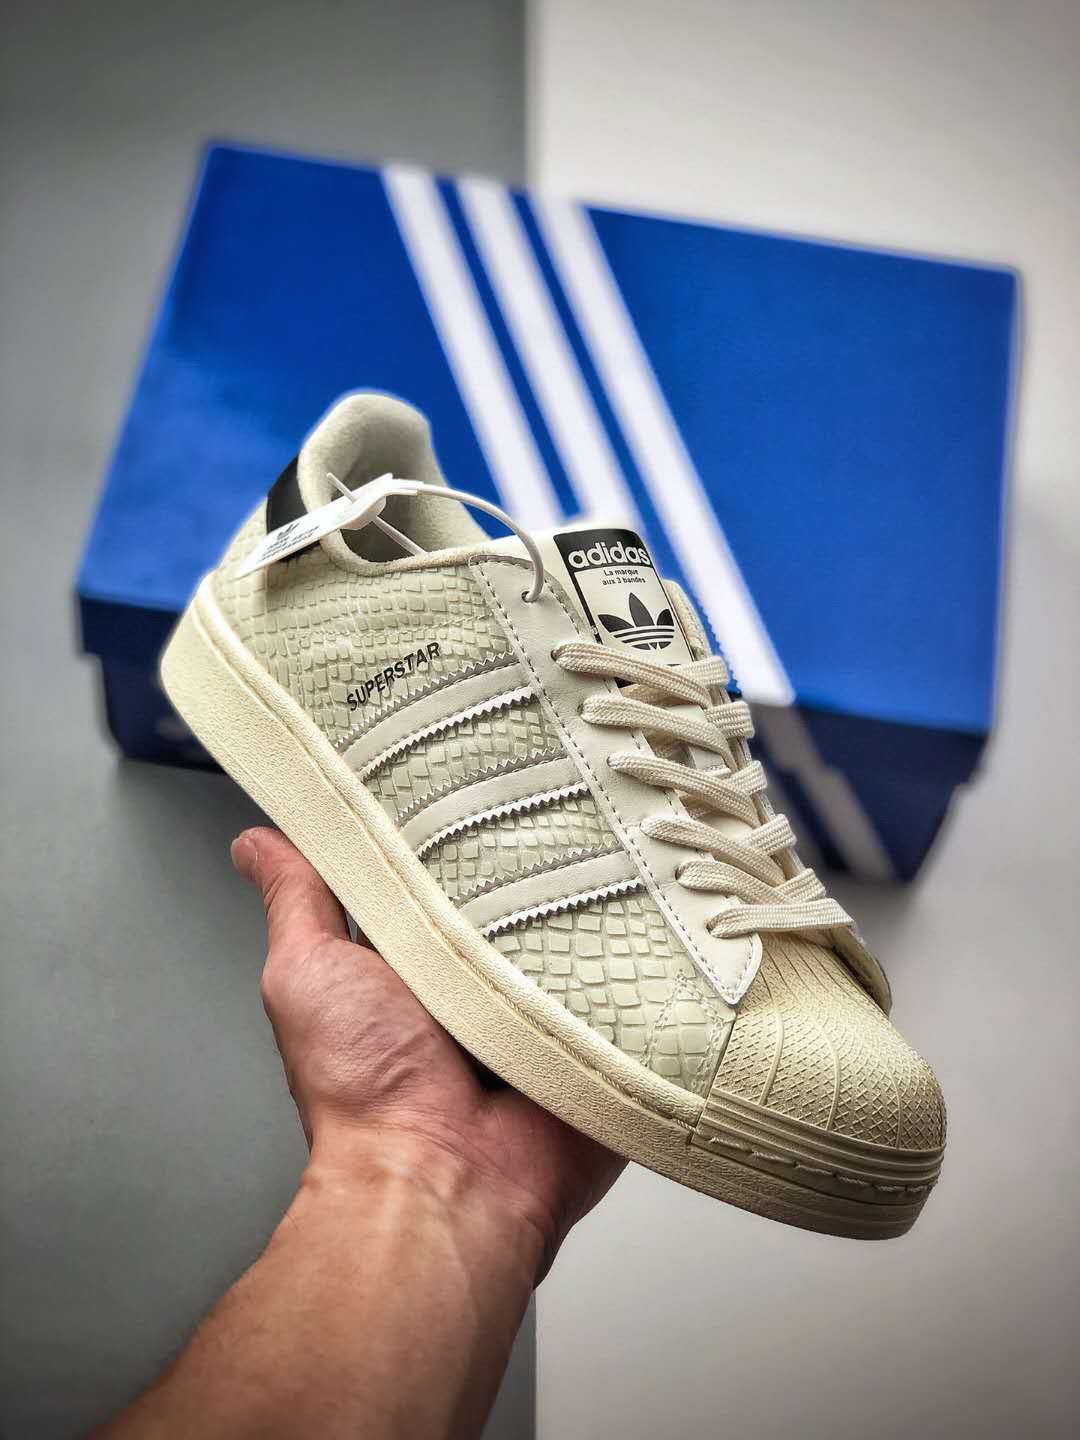 Adidas atmos x Superstar 'G-SNK' FY5253 - Iconic Collaboration with a Bold Snake Print